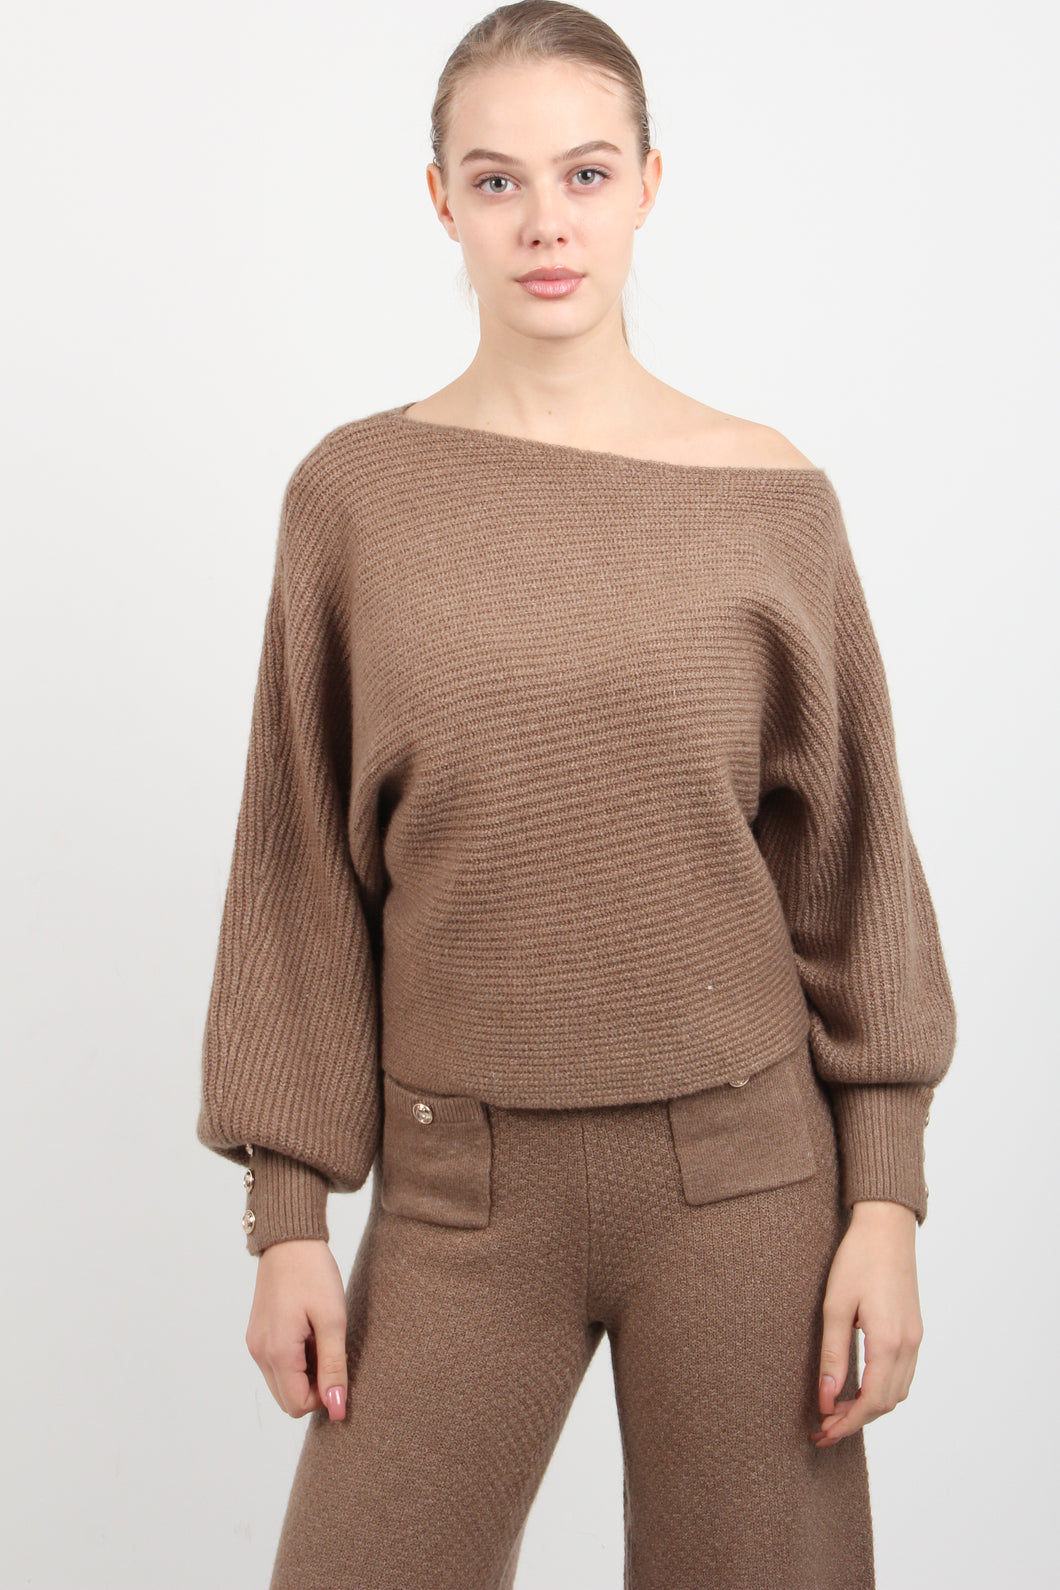 BUTTON CUFF ISADORA KNITTED TOP